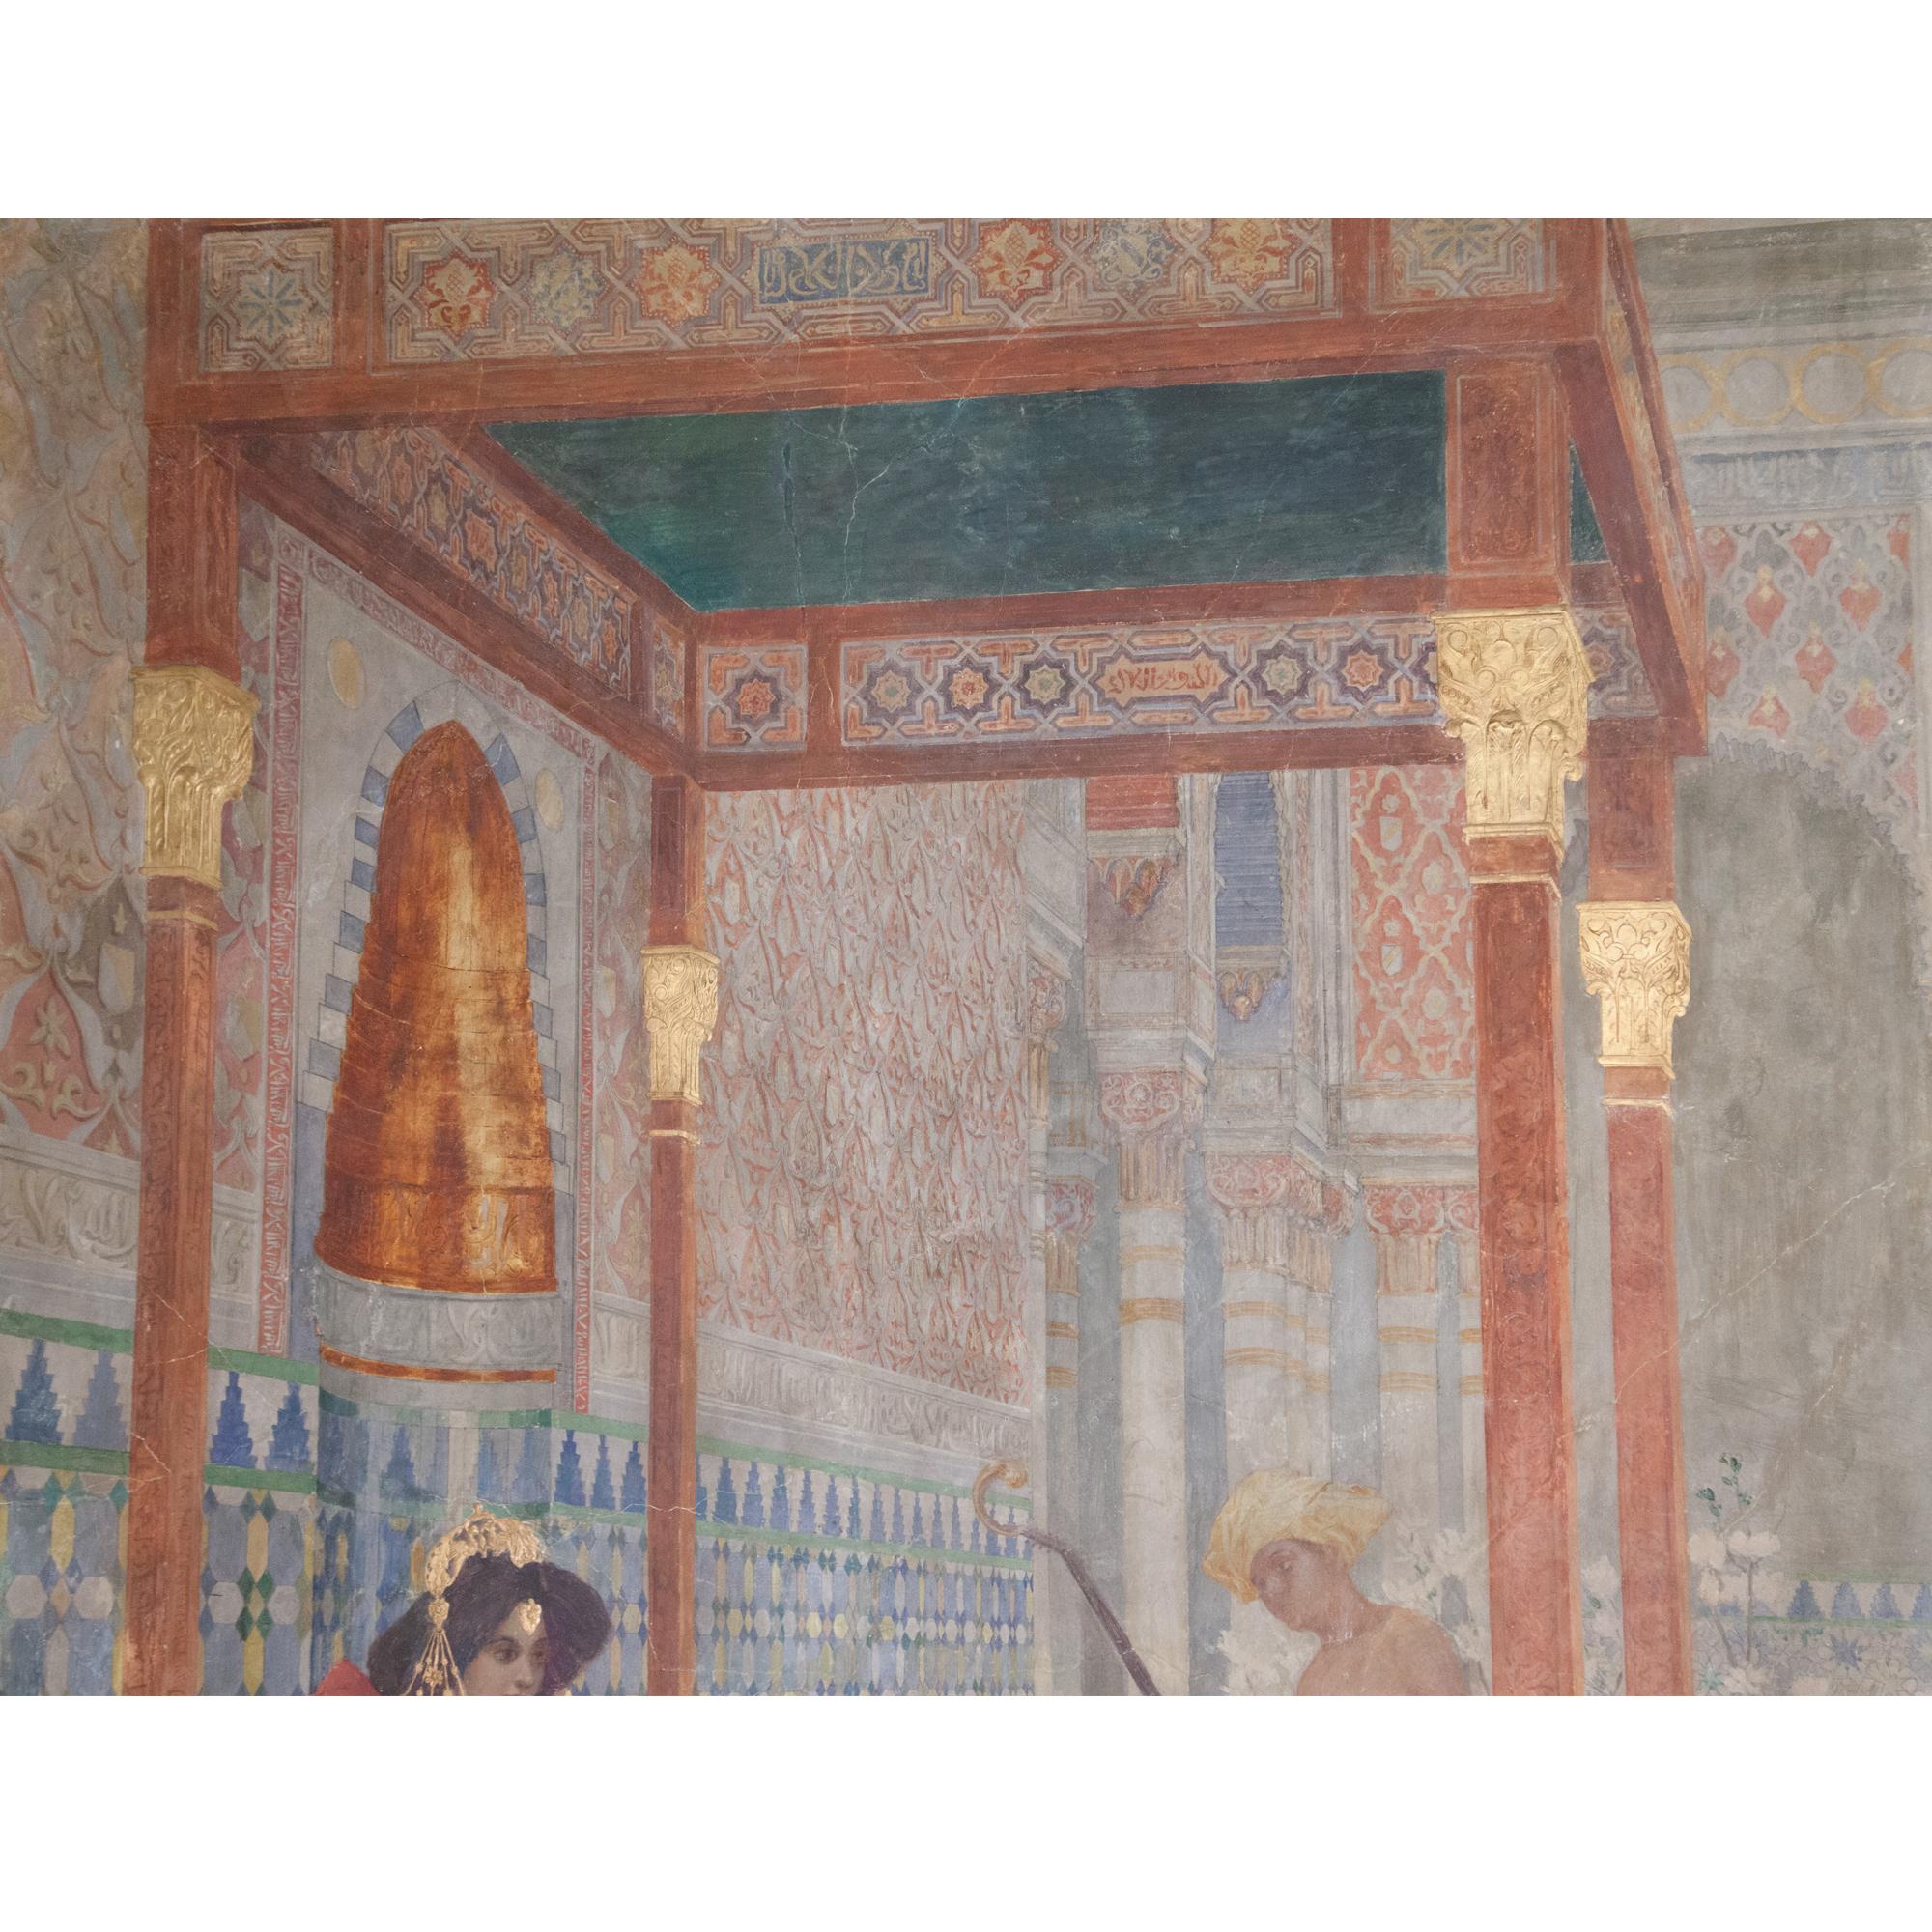 Very large rectangular fresco depicting a reclining beauty in an oriental architectural setting, dressed only in lavish gold jewelry and a silk skirt. A musician stands in the background. The capitals as well as the gold jewelry are in relief and